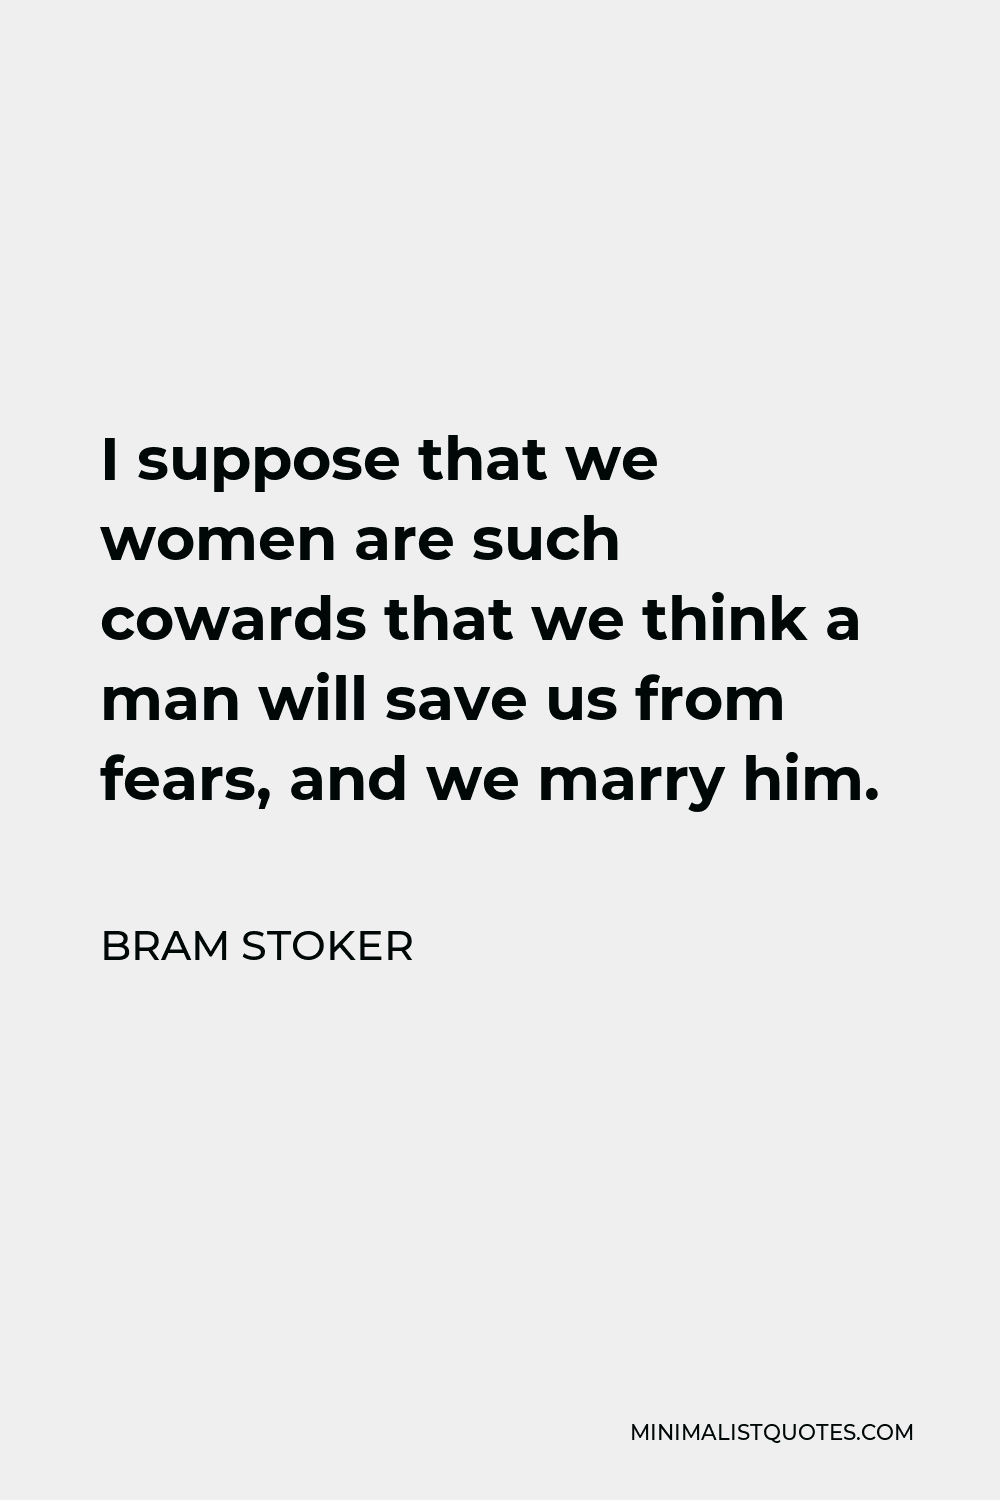 Bram Stoker Quote - I suppose that we women are such cowards that we think a man will save us from fears, and we marry him.